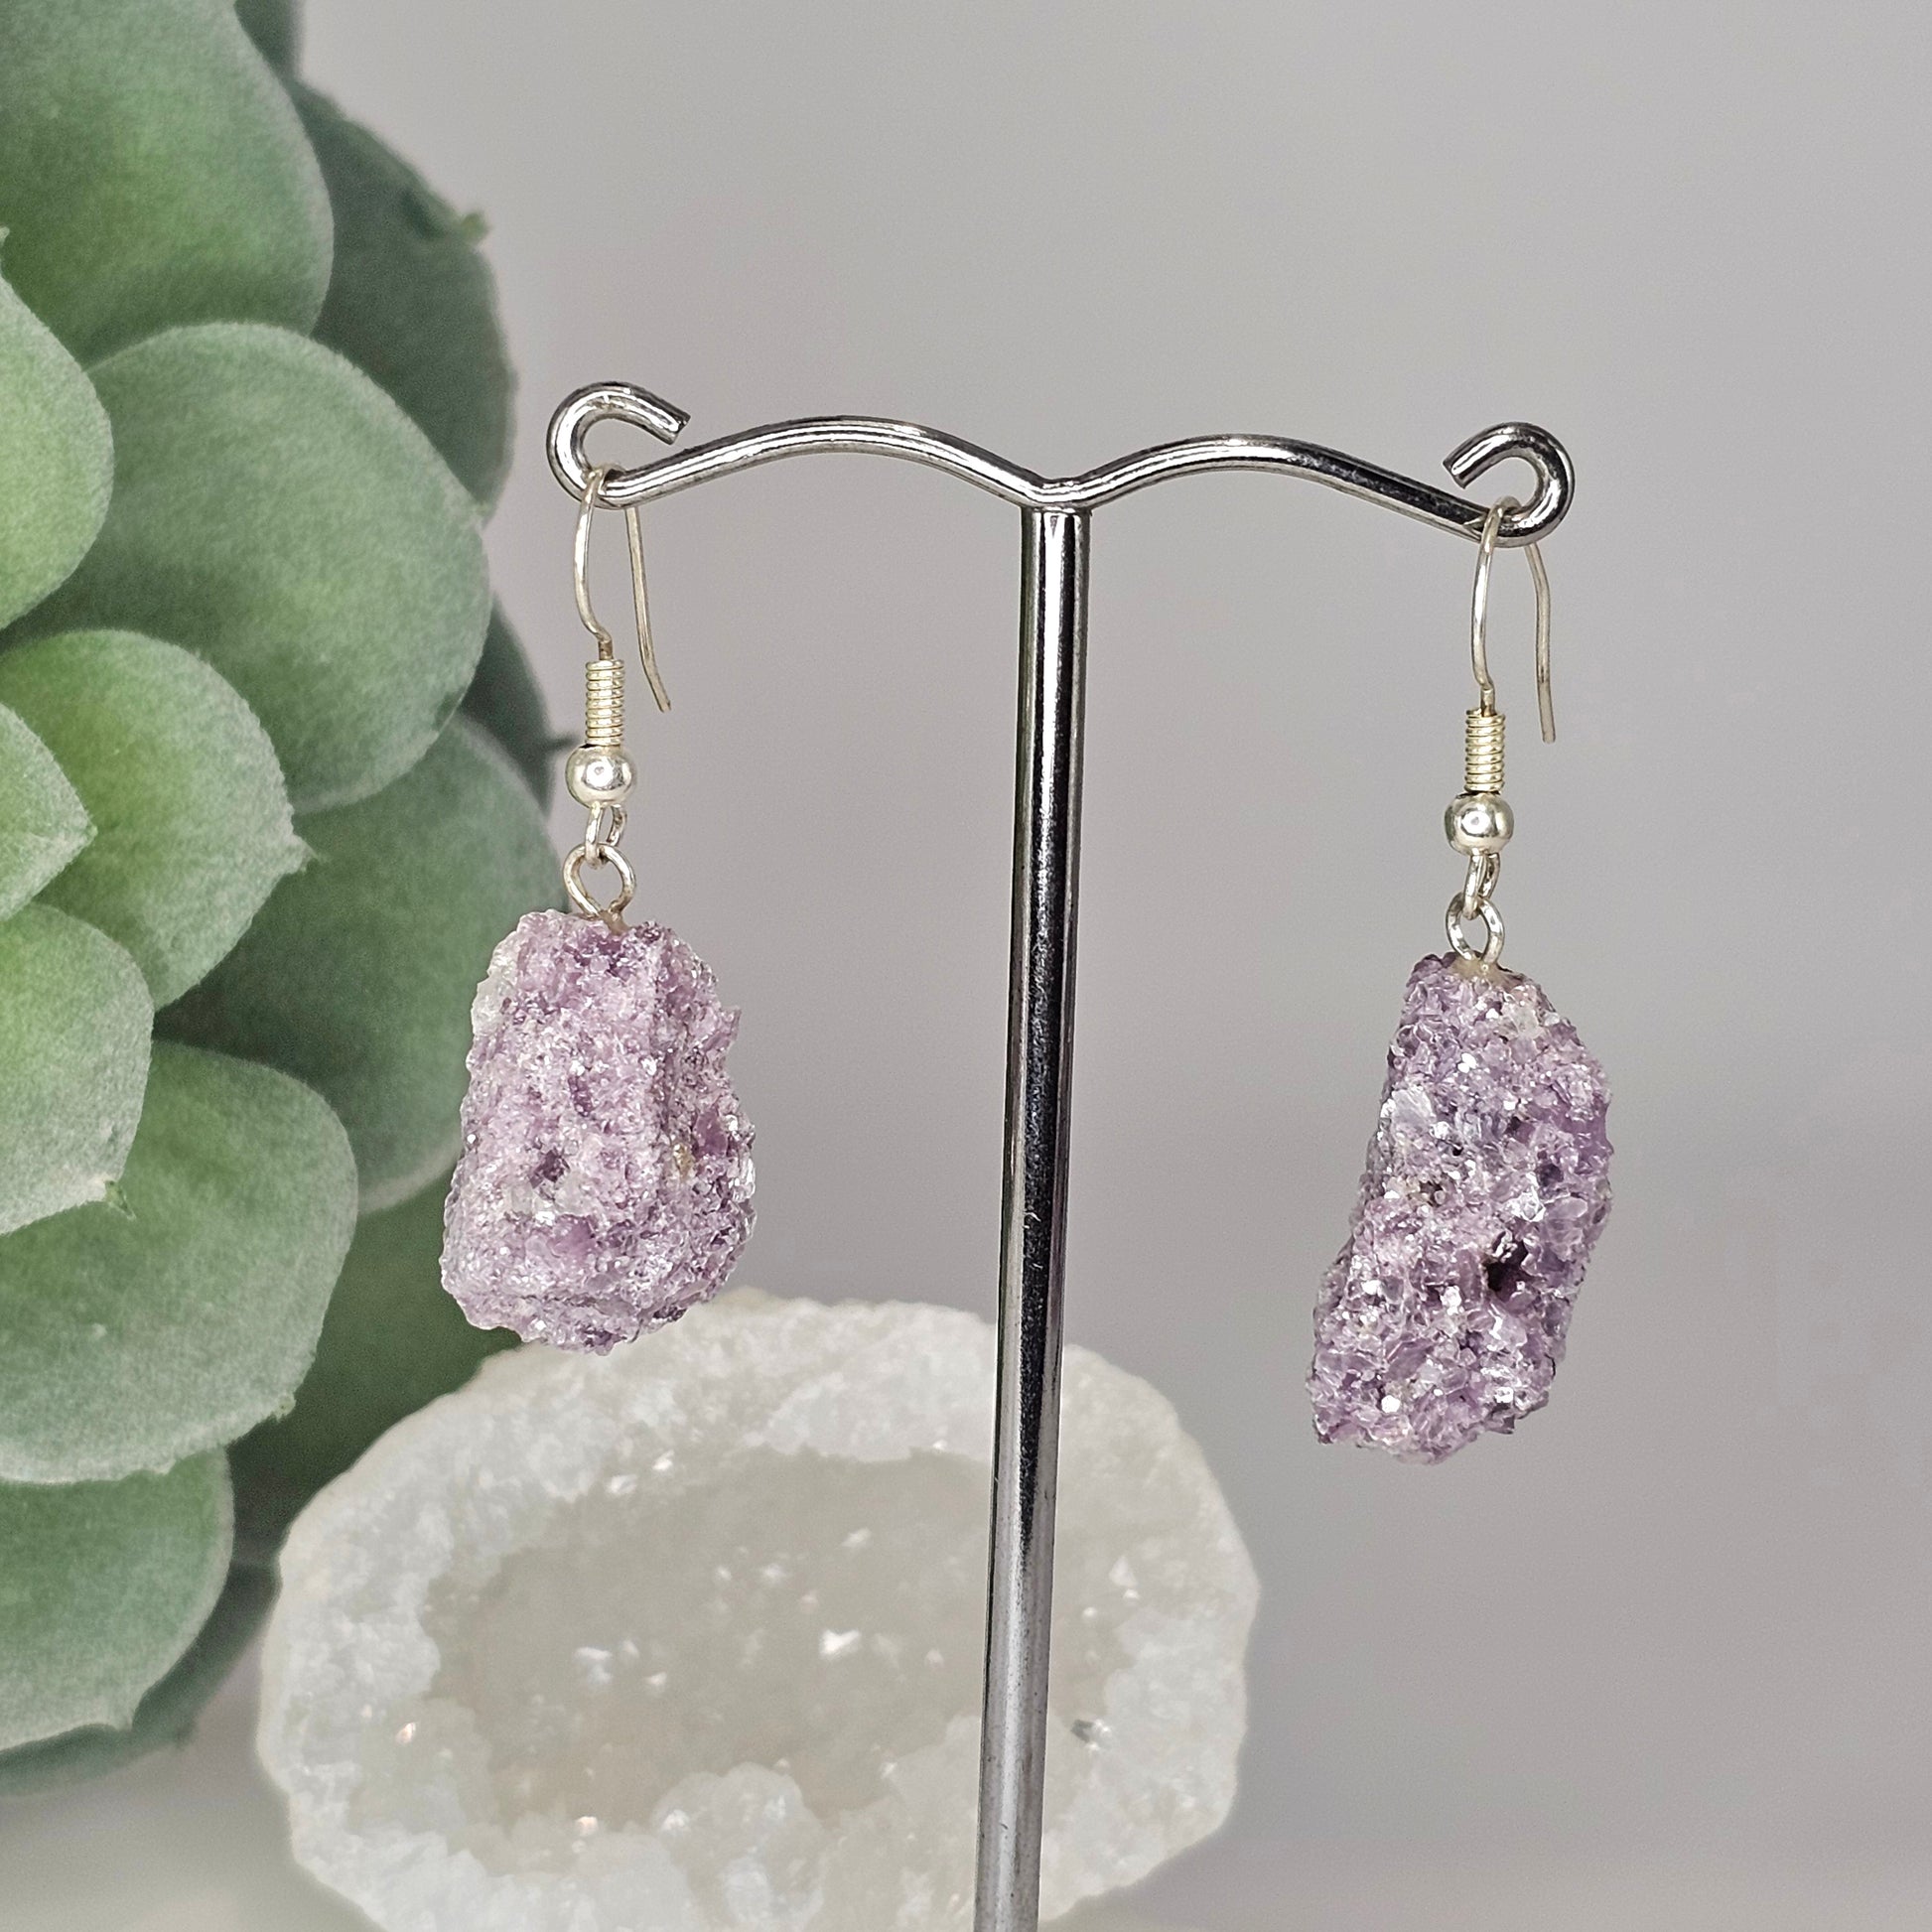 Raw Lepidolite silver plated earrings with hypo-allergenic ear wires.